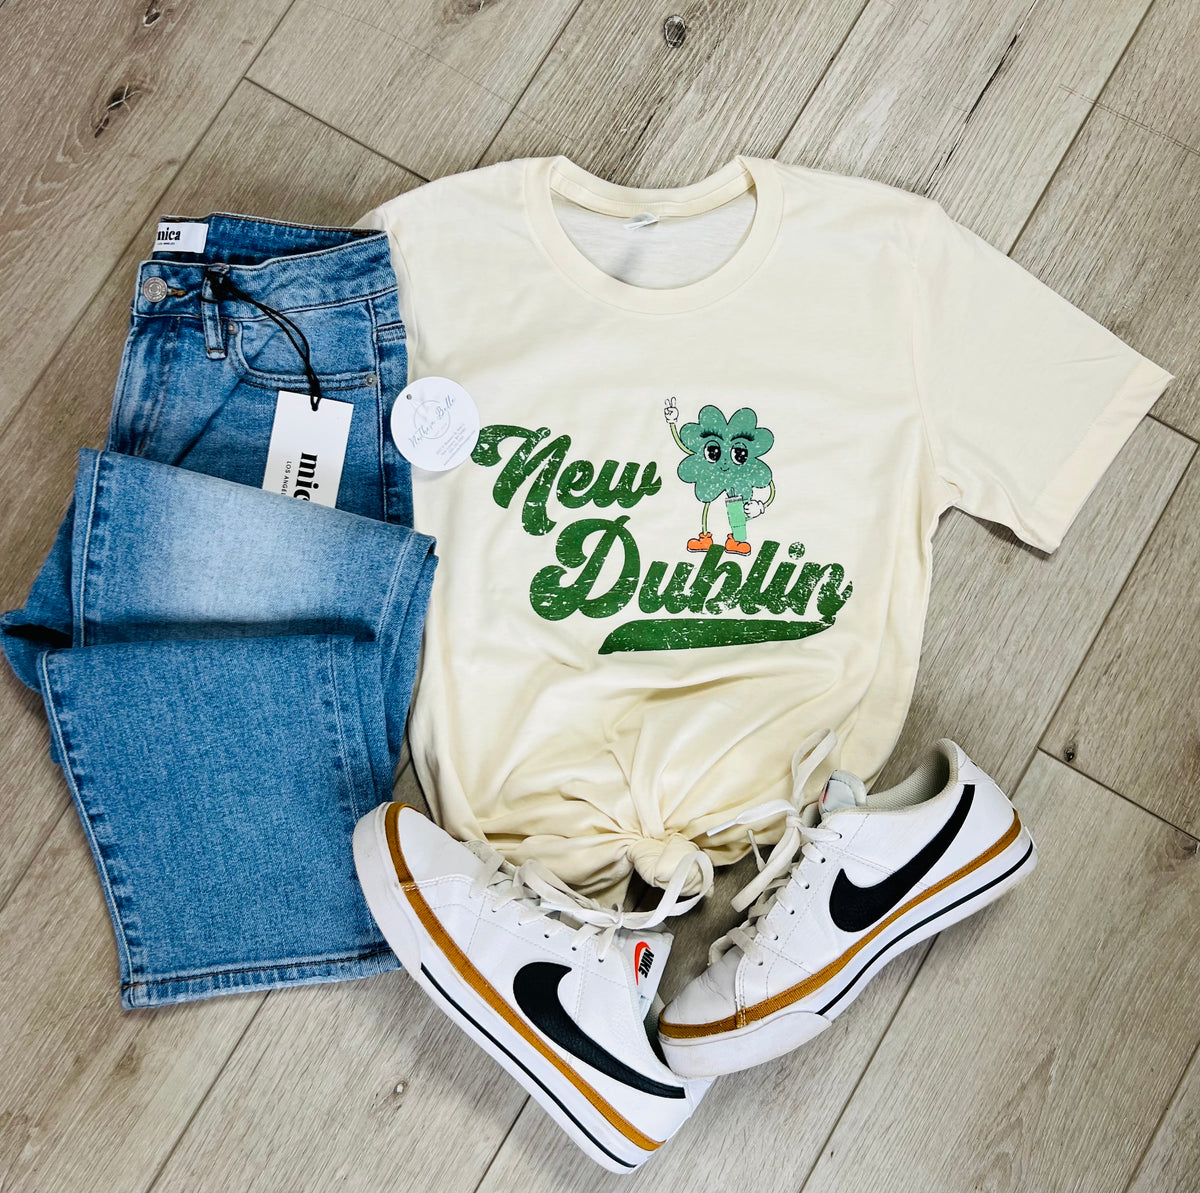 Northern Belle X down Home on Main New Dublin Graphic Tee